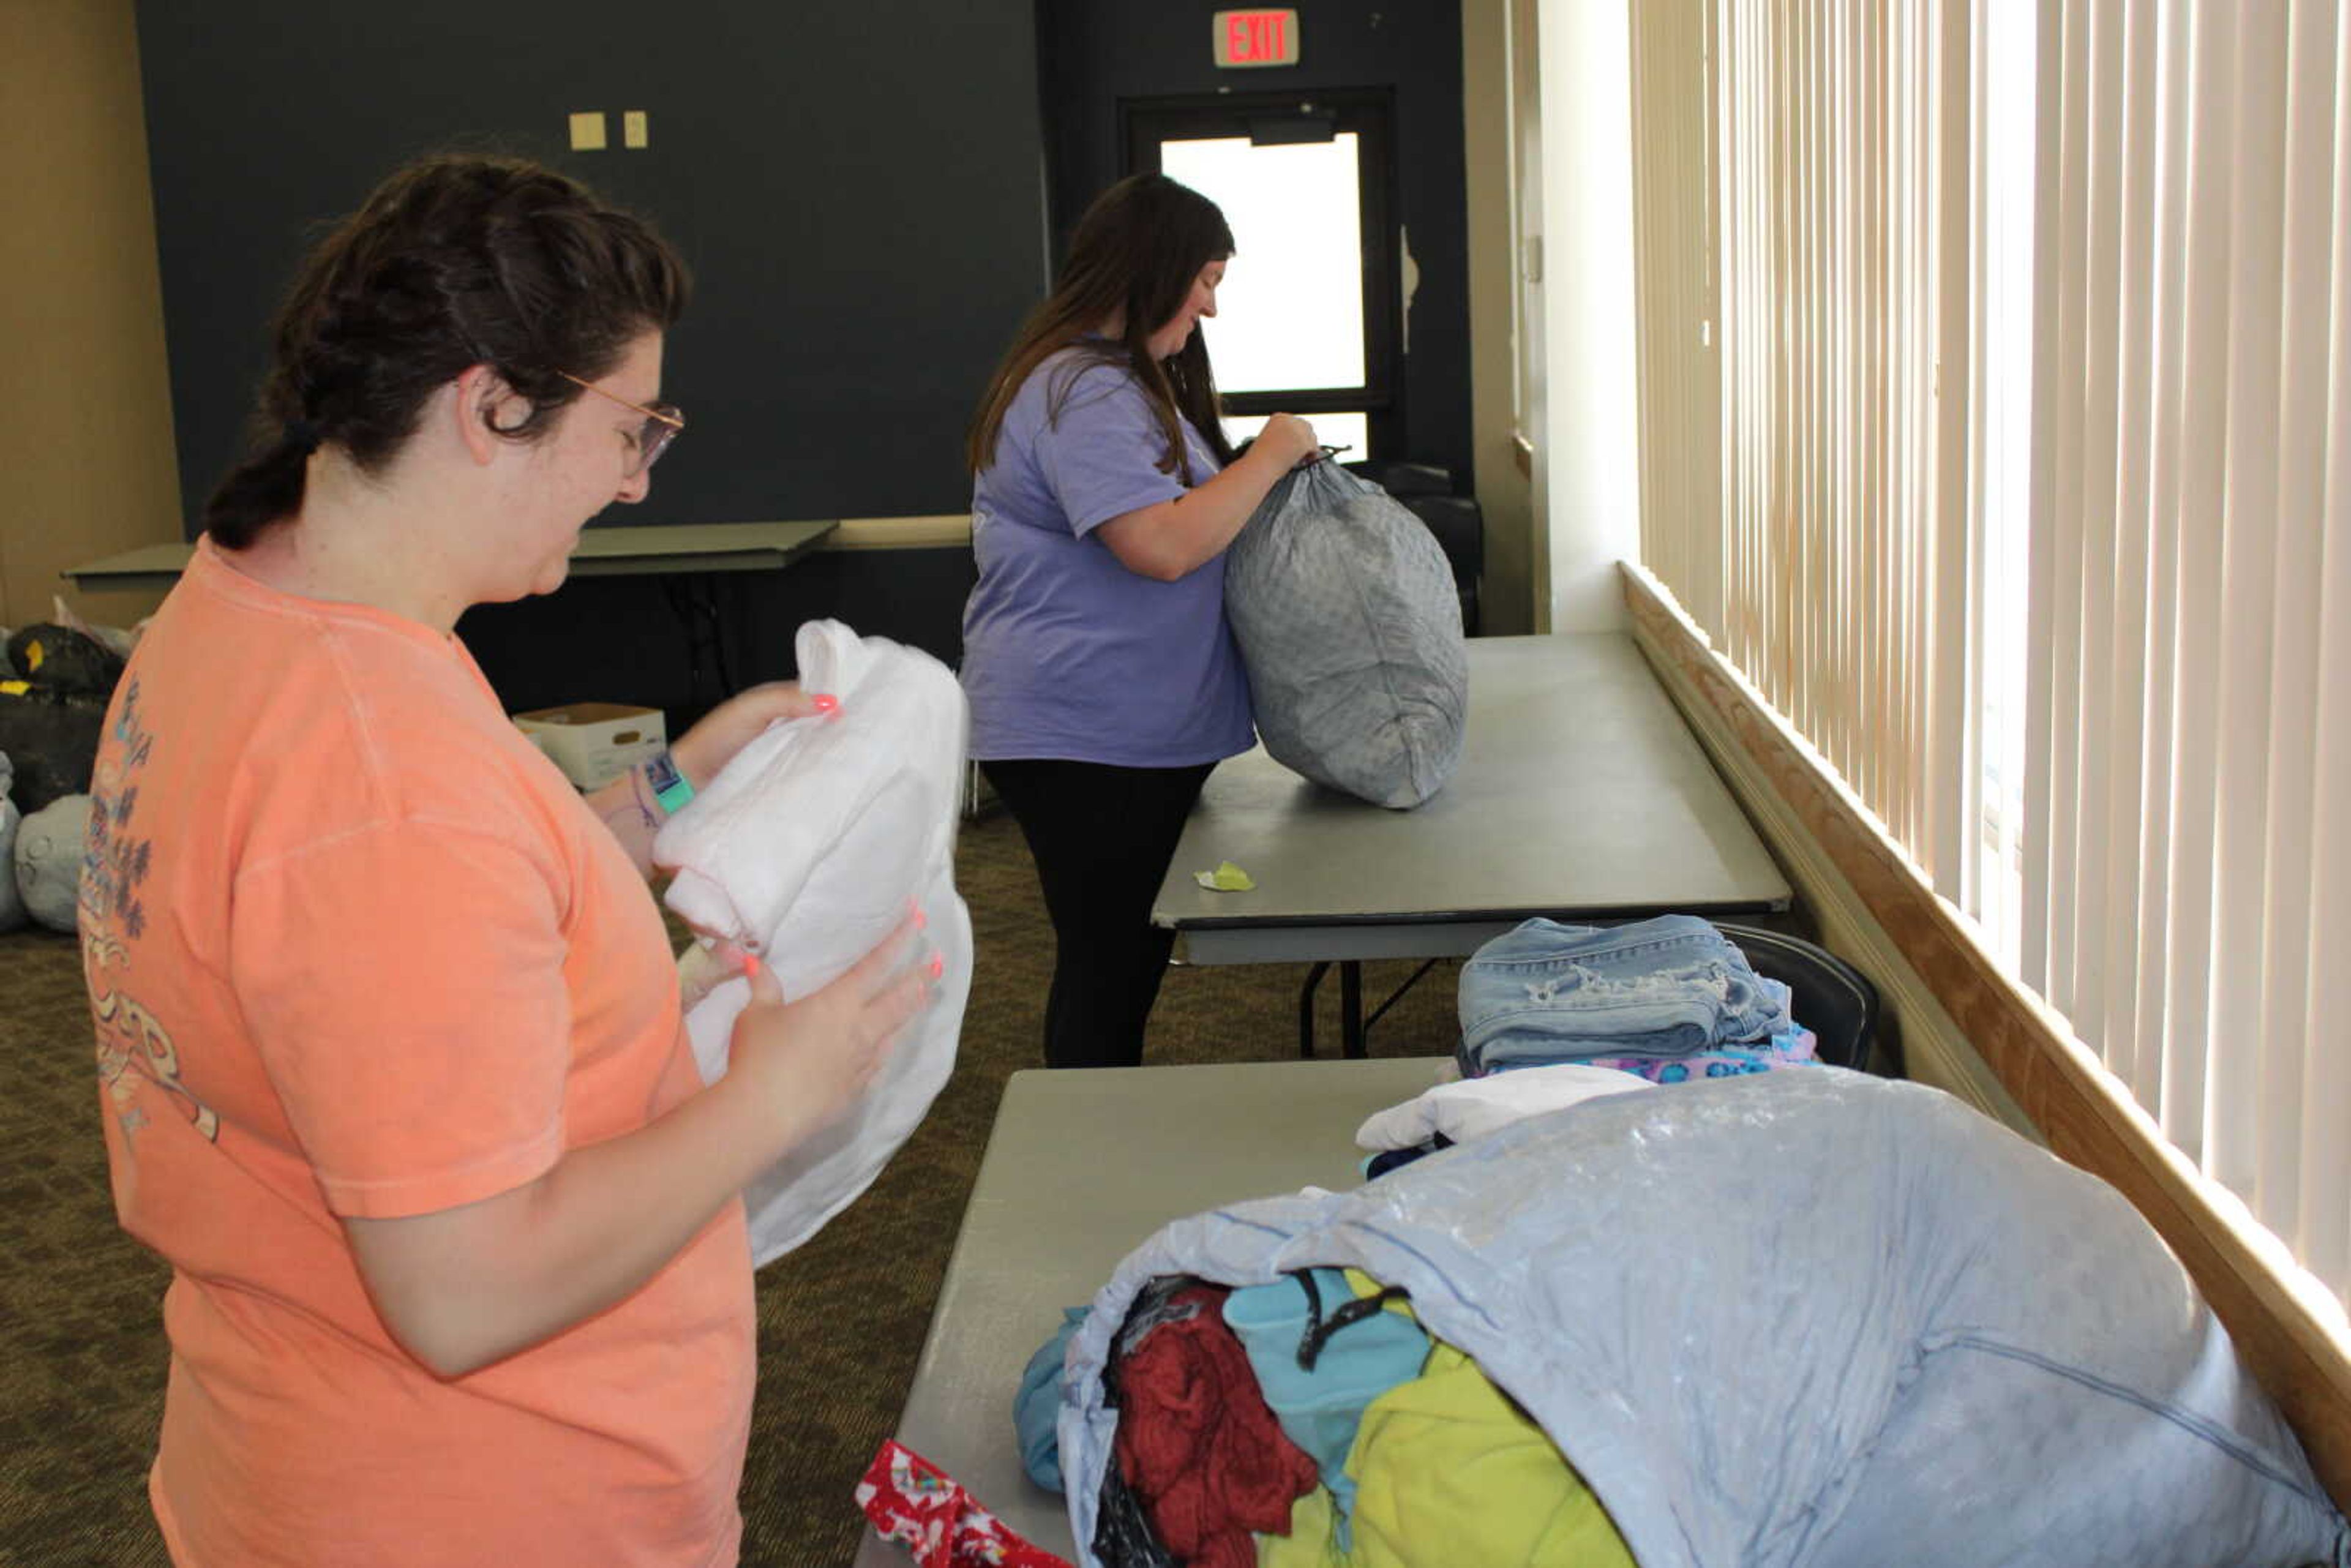 Two members of Greek Life work to bag clothes donated during the Greek Week clothing drive.